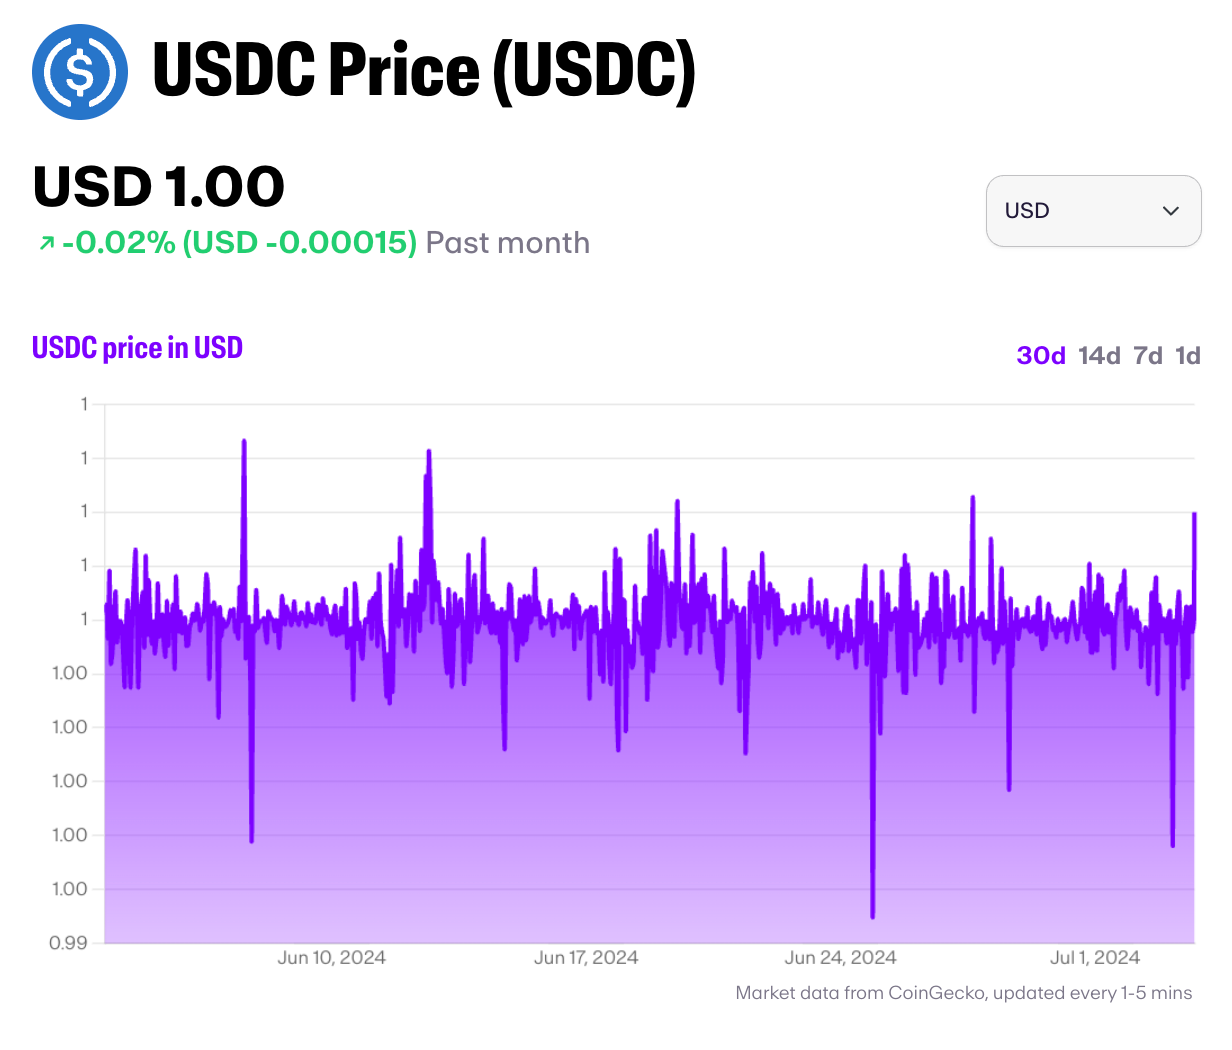 A chart of the USDC price over time.